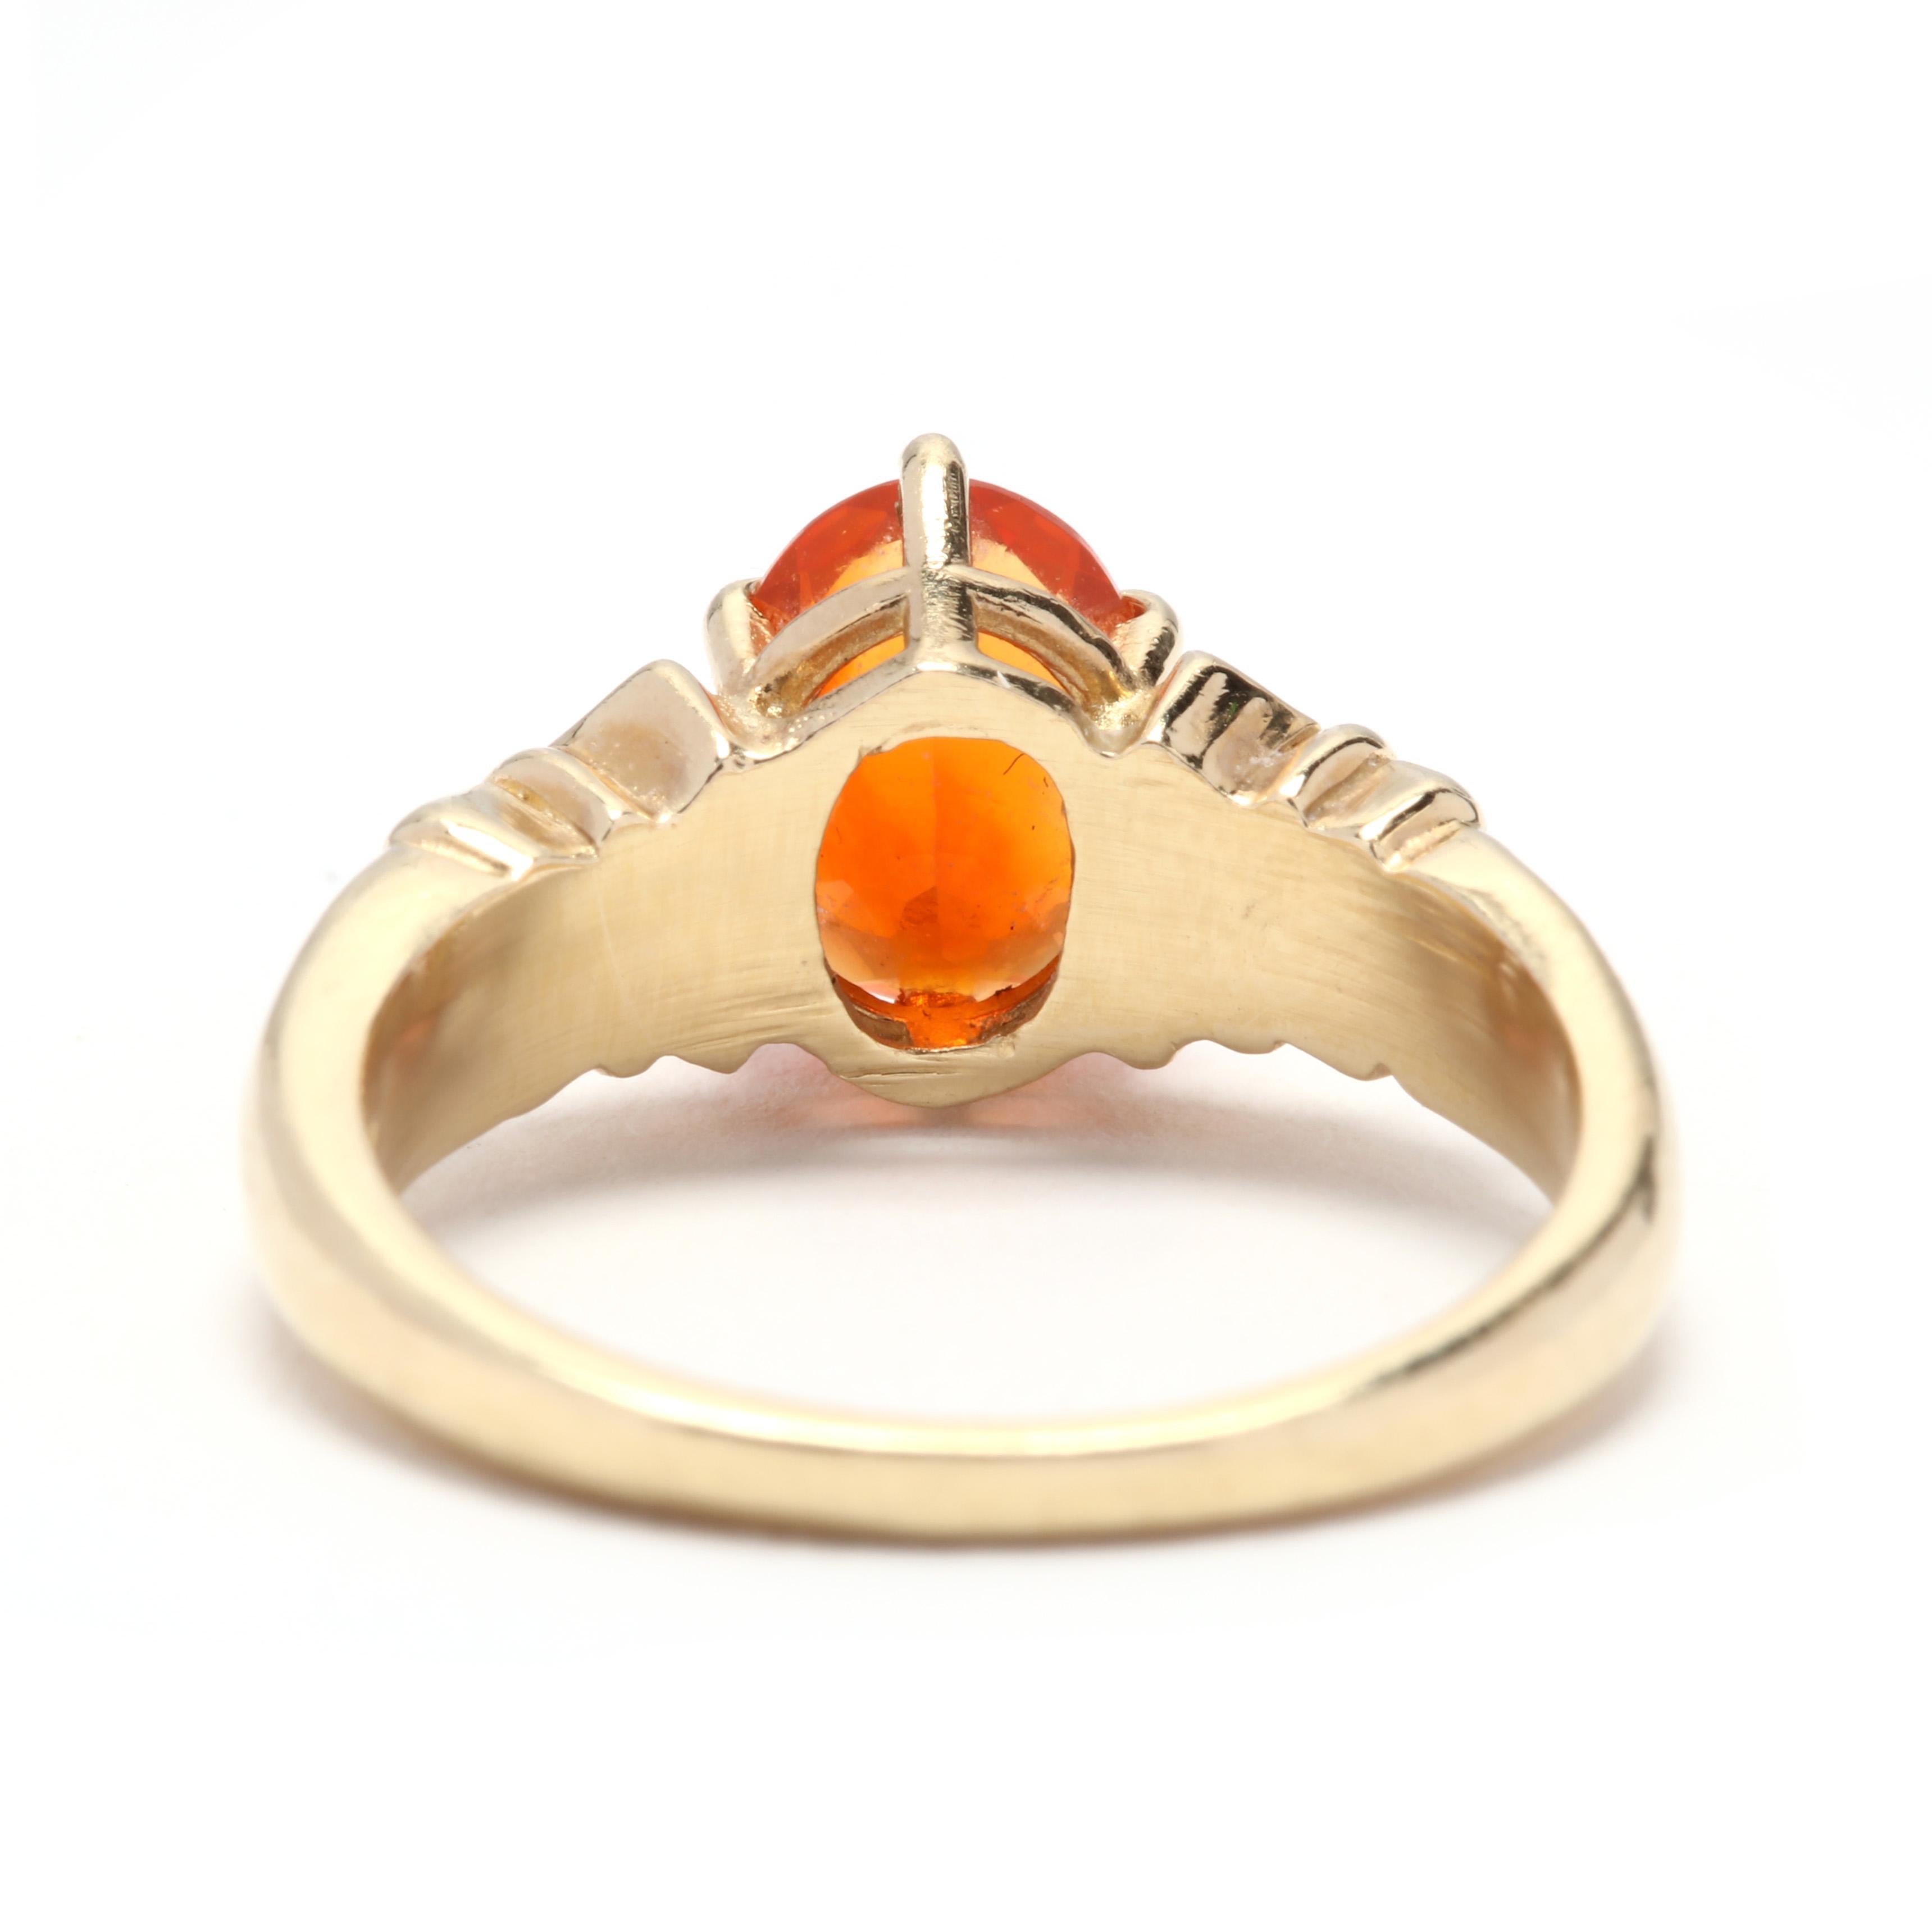 Retro 14 Karat Yellow Gold and Fire Opal Solitaire Ring